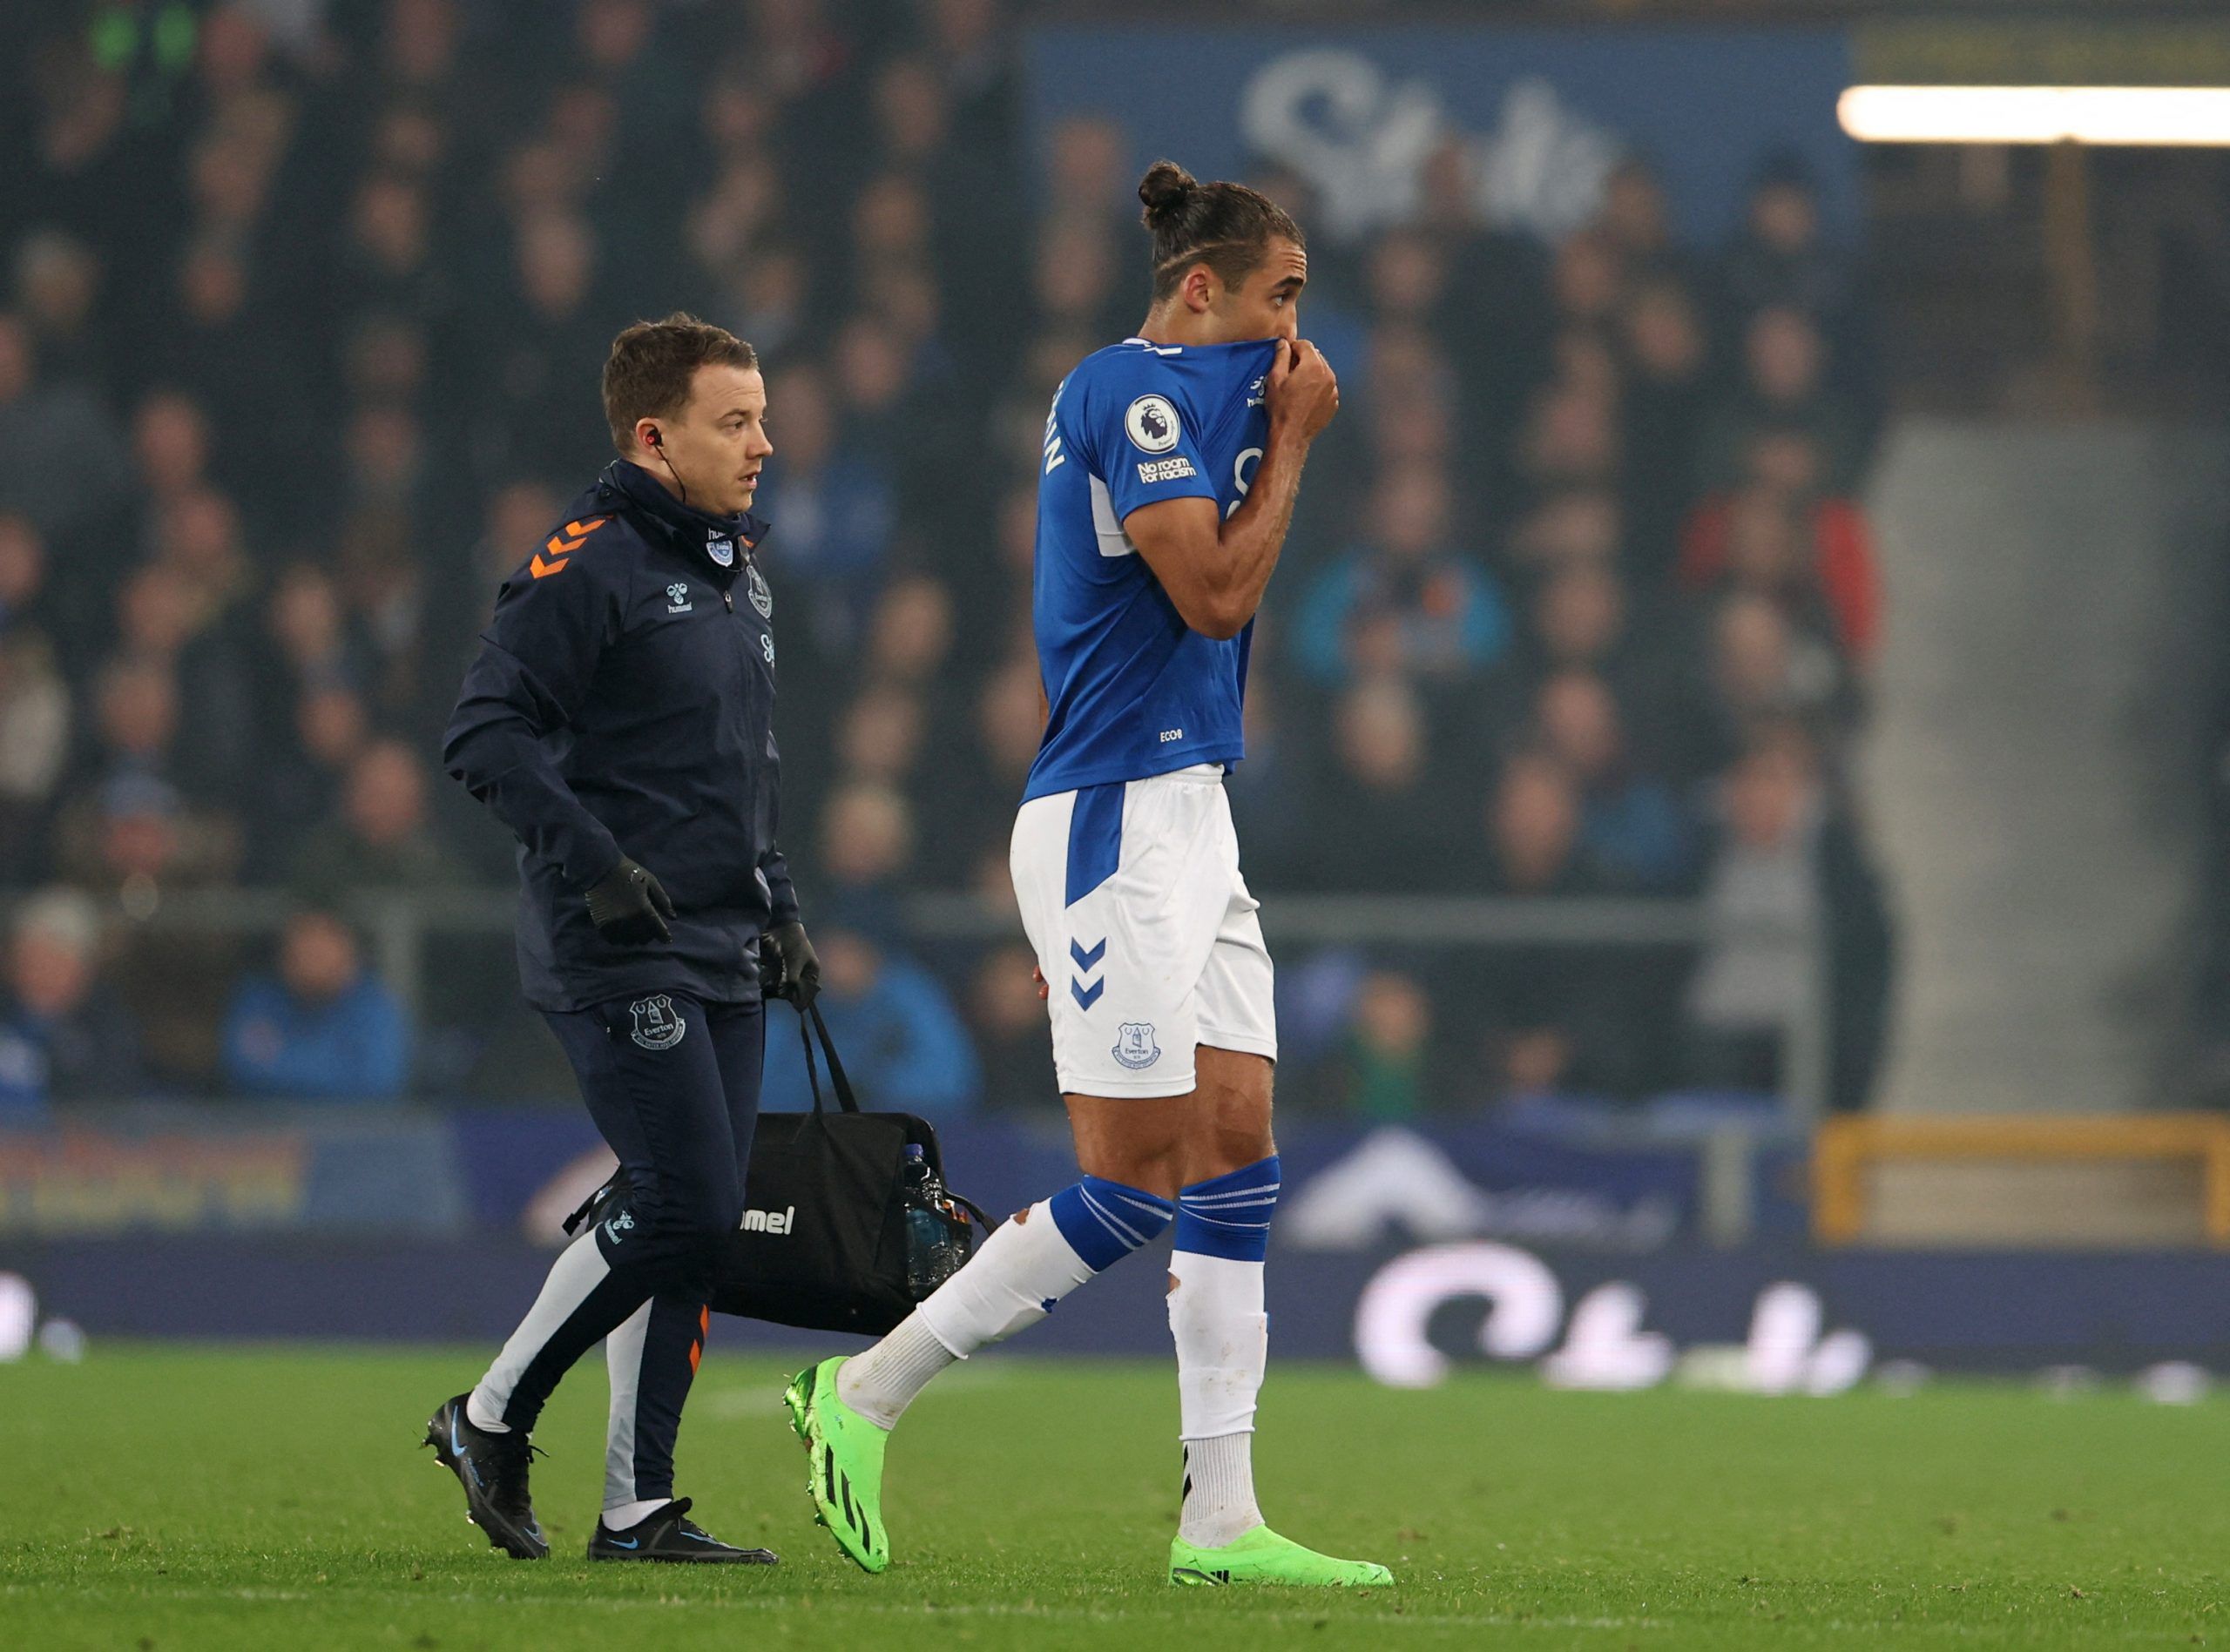 Everton: Dominic Calvert-Lewin will be ‘touch and go’ for Wolves -Everton News